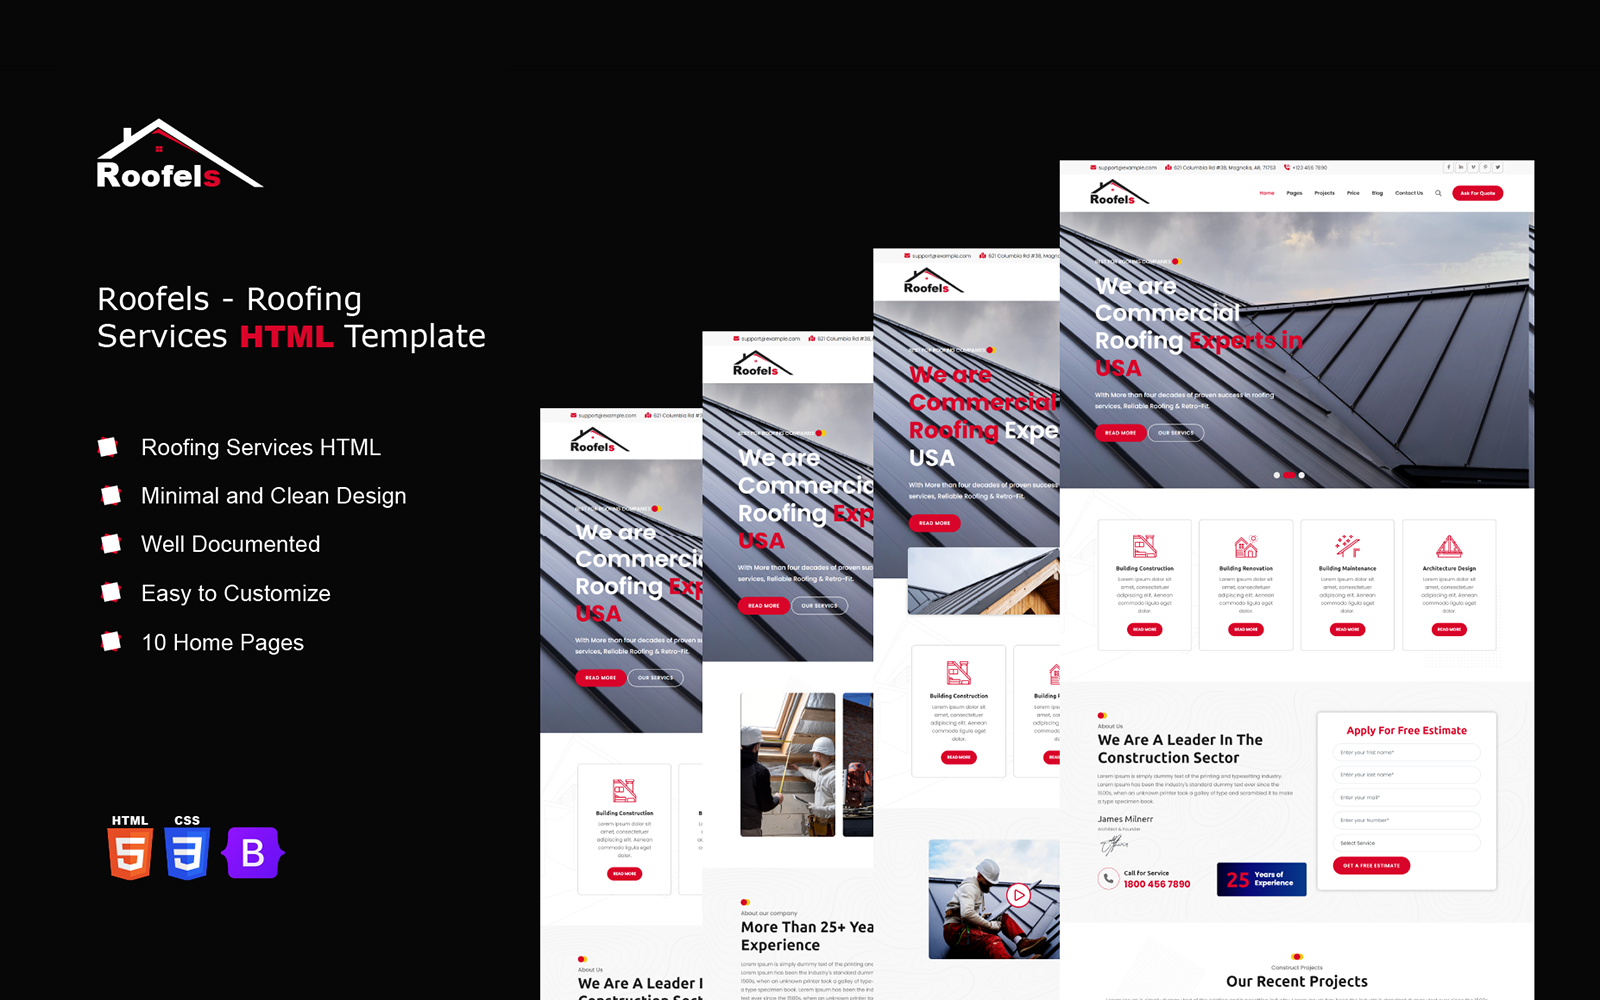 Roofels - Roofing Services HTML Template